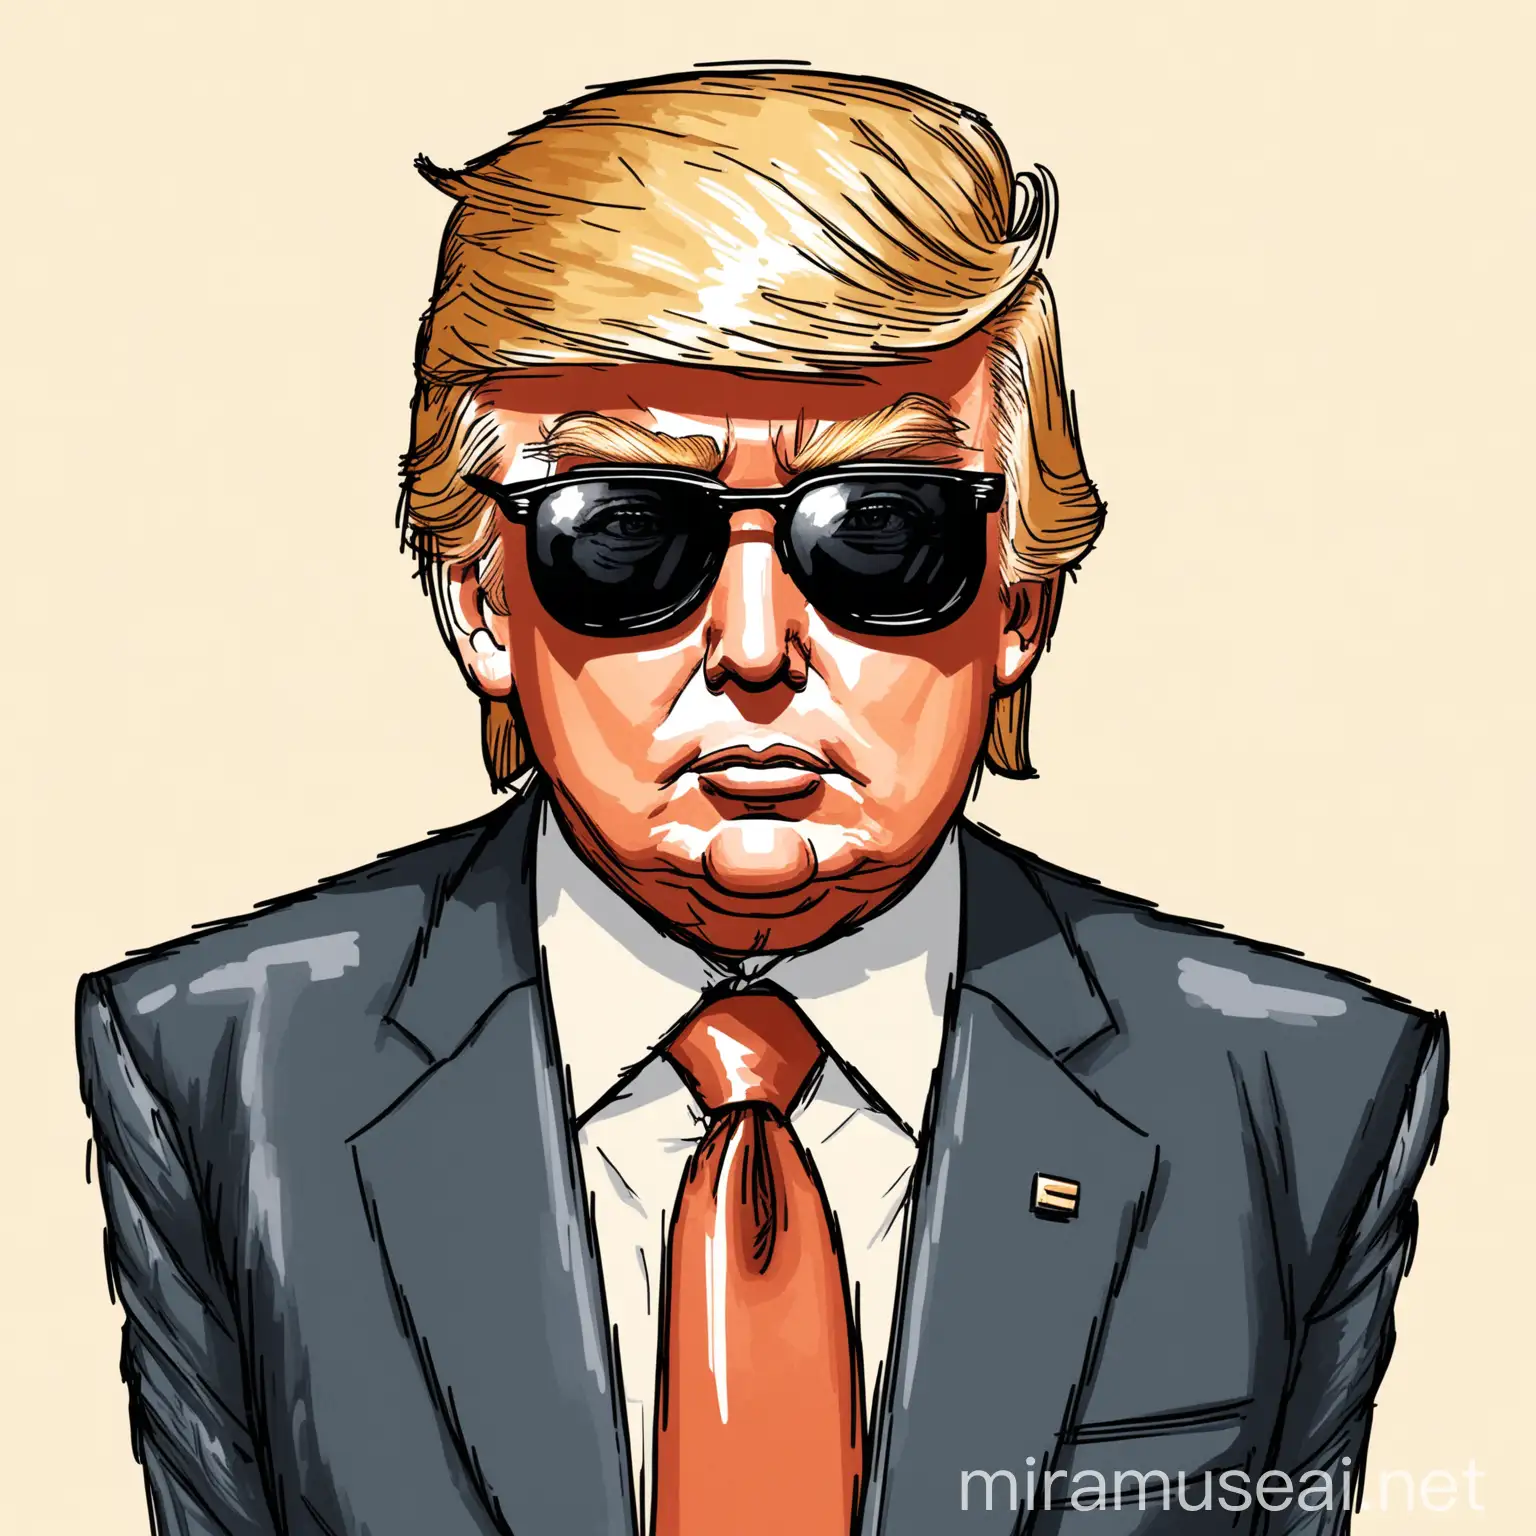 hand-drawn illustration of Donald Trump in suit, wears sunglasses
